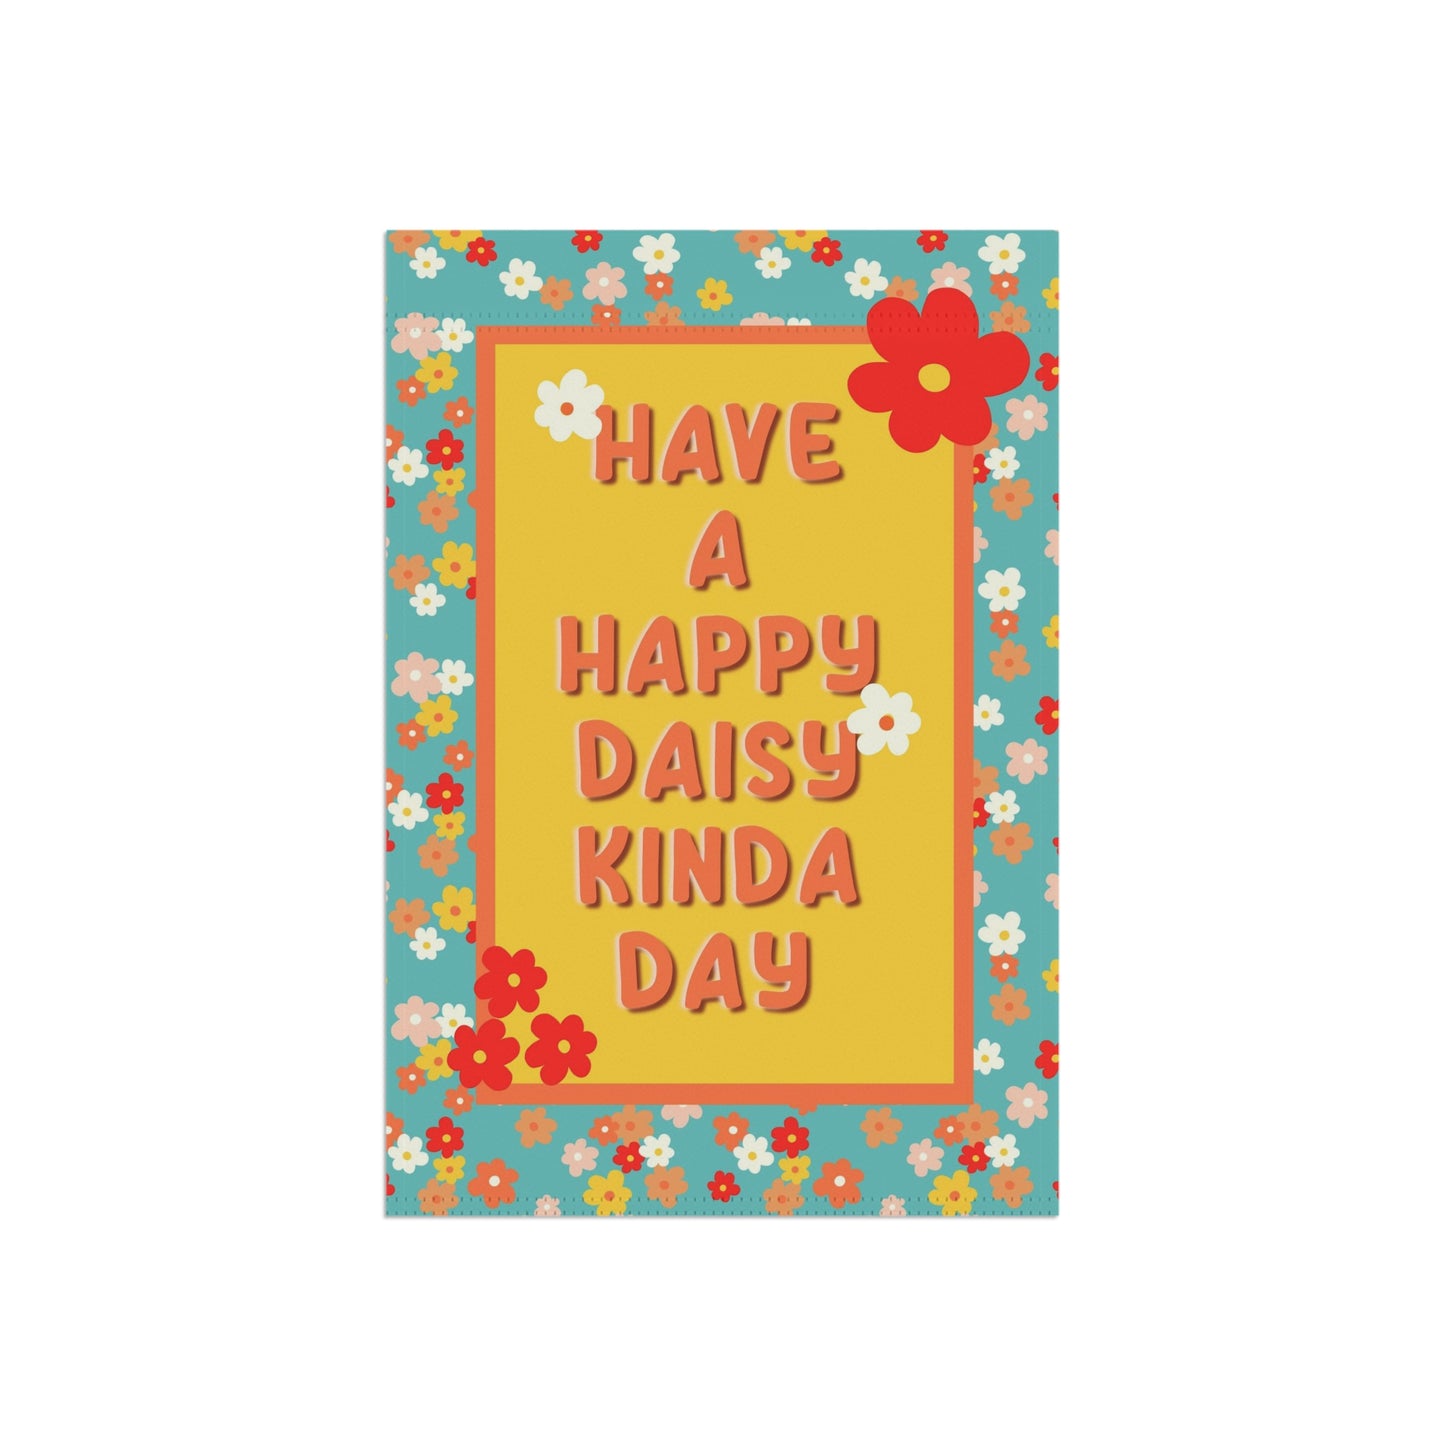 Ditzy Daisies - Have a Happy Daisy Kinda Day - Garden Banner